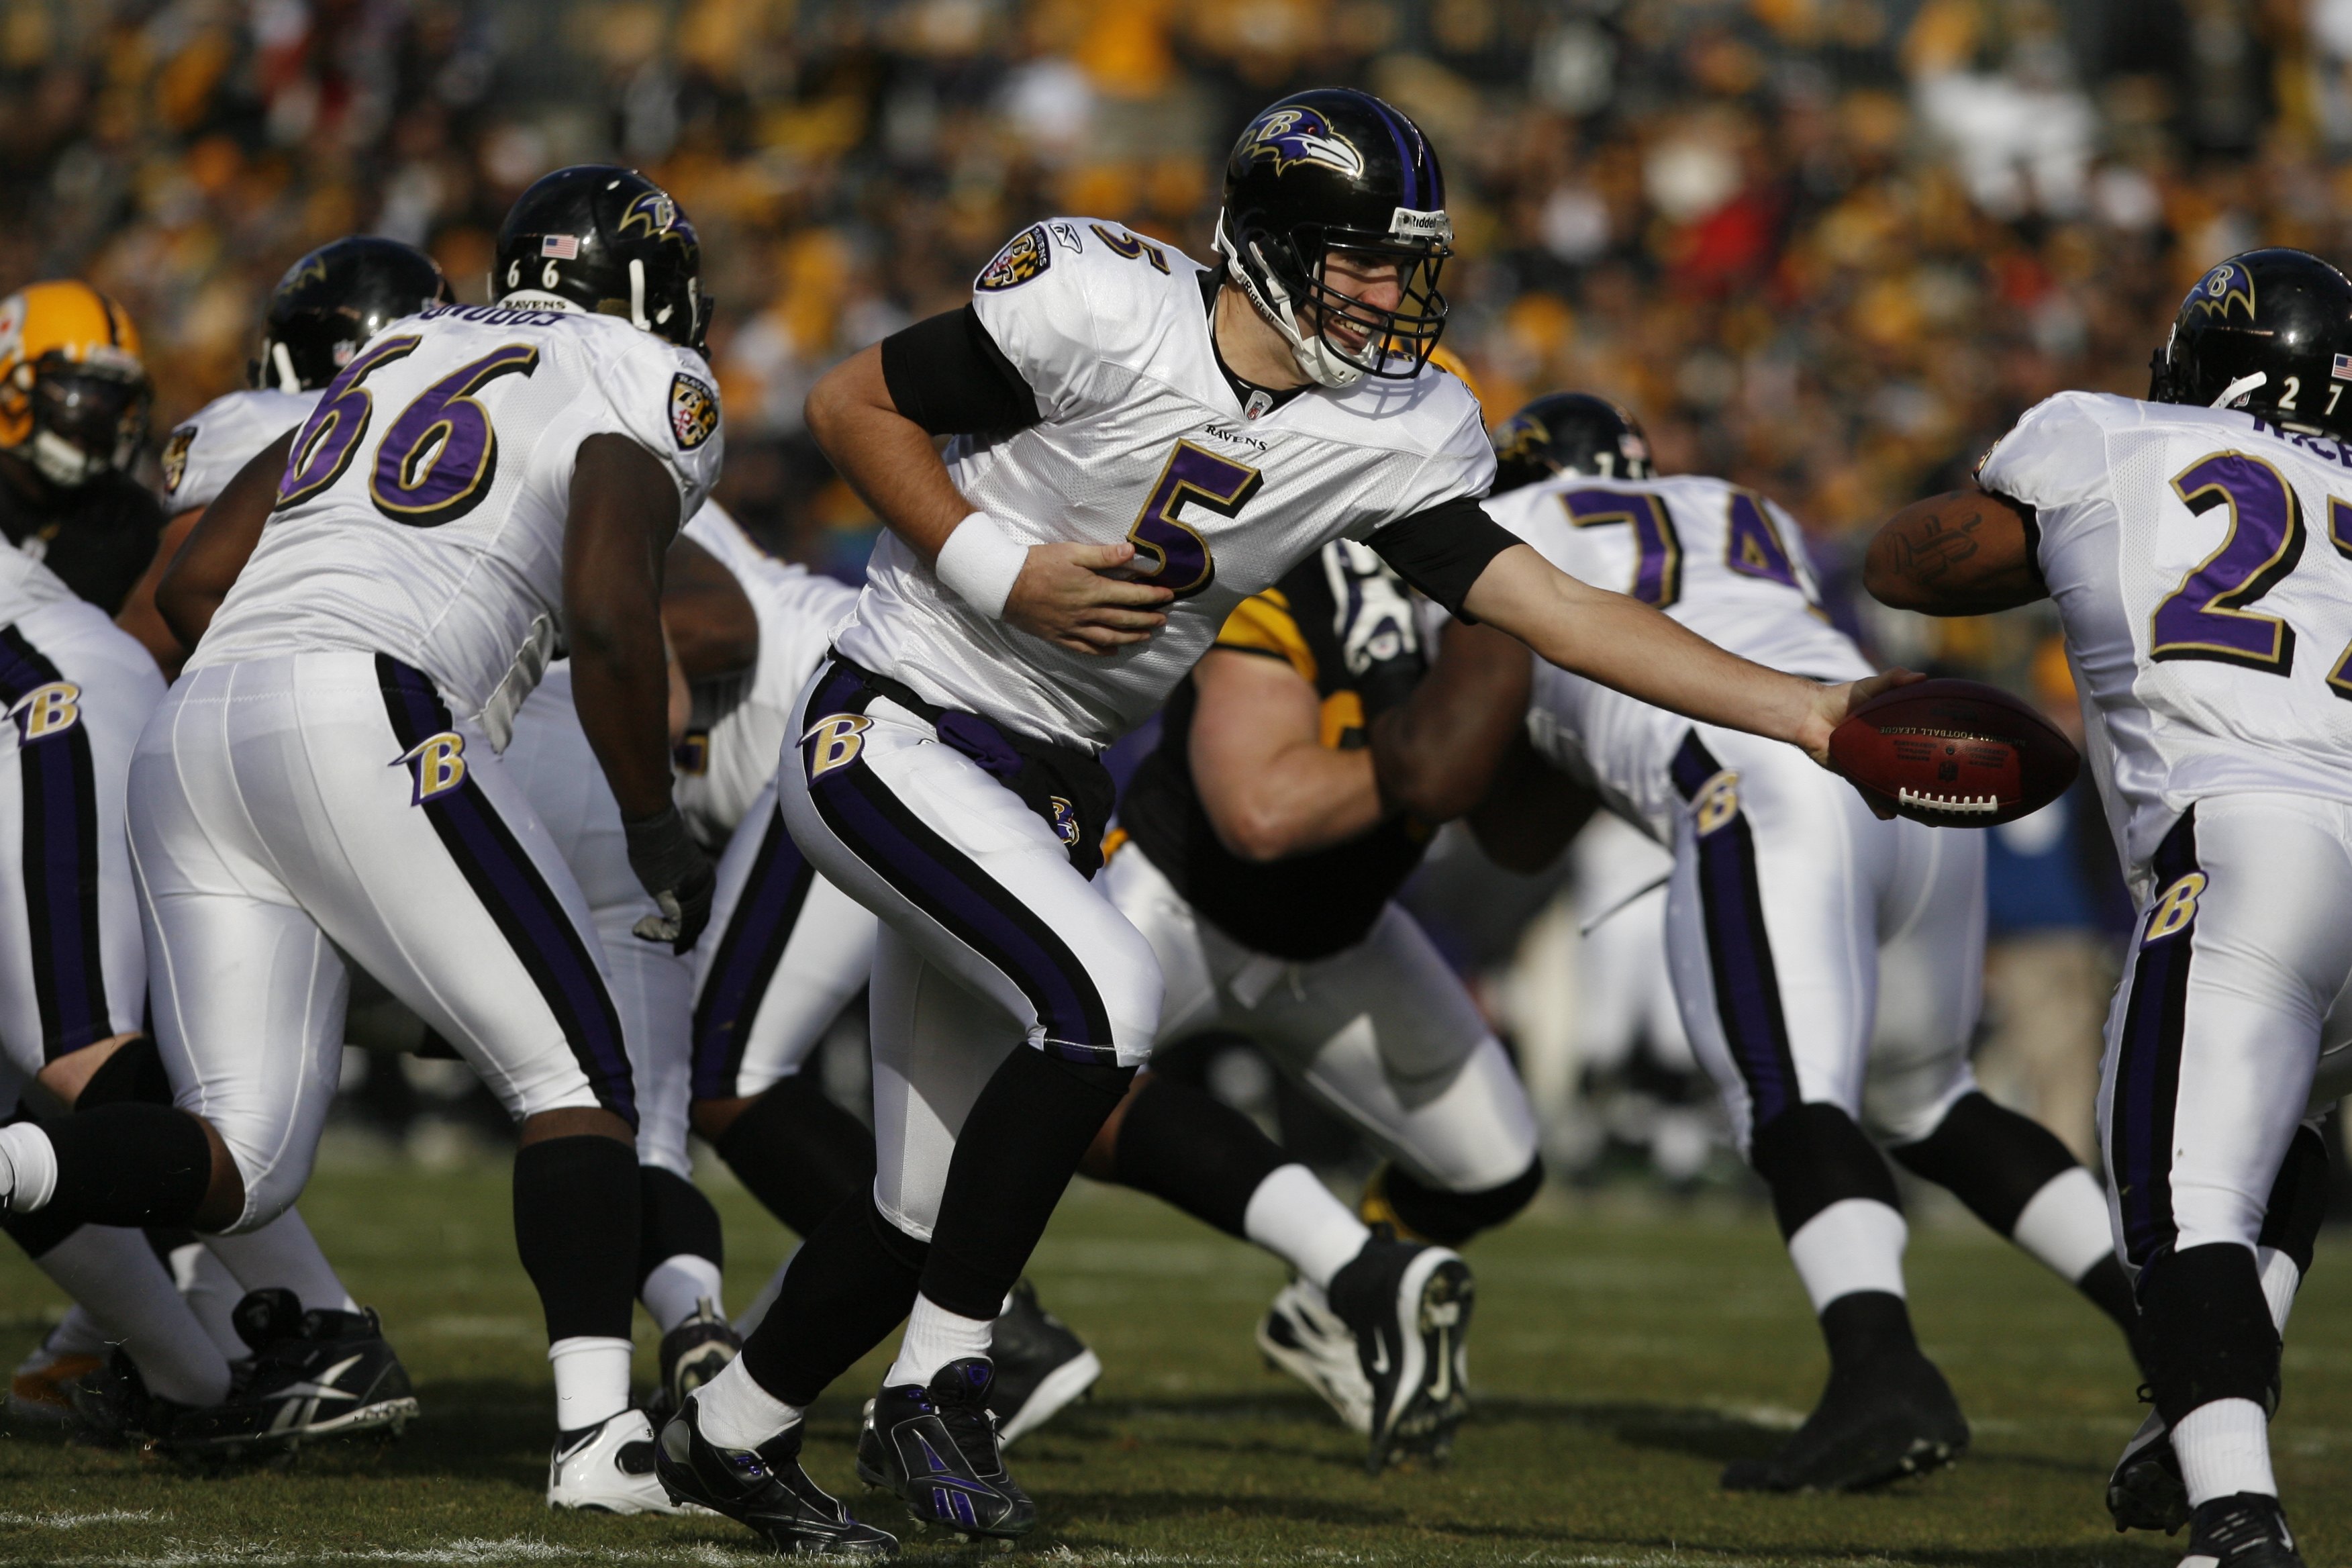 PITTSBURGH - DECEMBER 27:  Joe Flacco #5 of the Baltimore Ravens hands off during the game against the Pittsburgh Steelers on December 27, 2009 at Heinz Field in Pittsburgh, Pennsylvania. (Photo by Gregory Shamus/Getty Images)